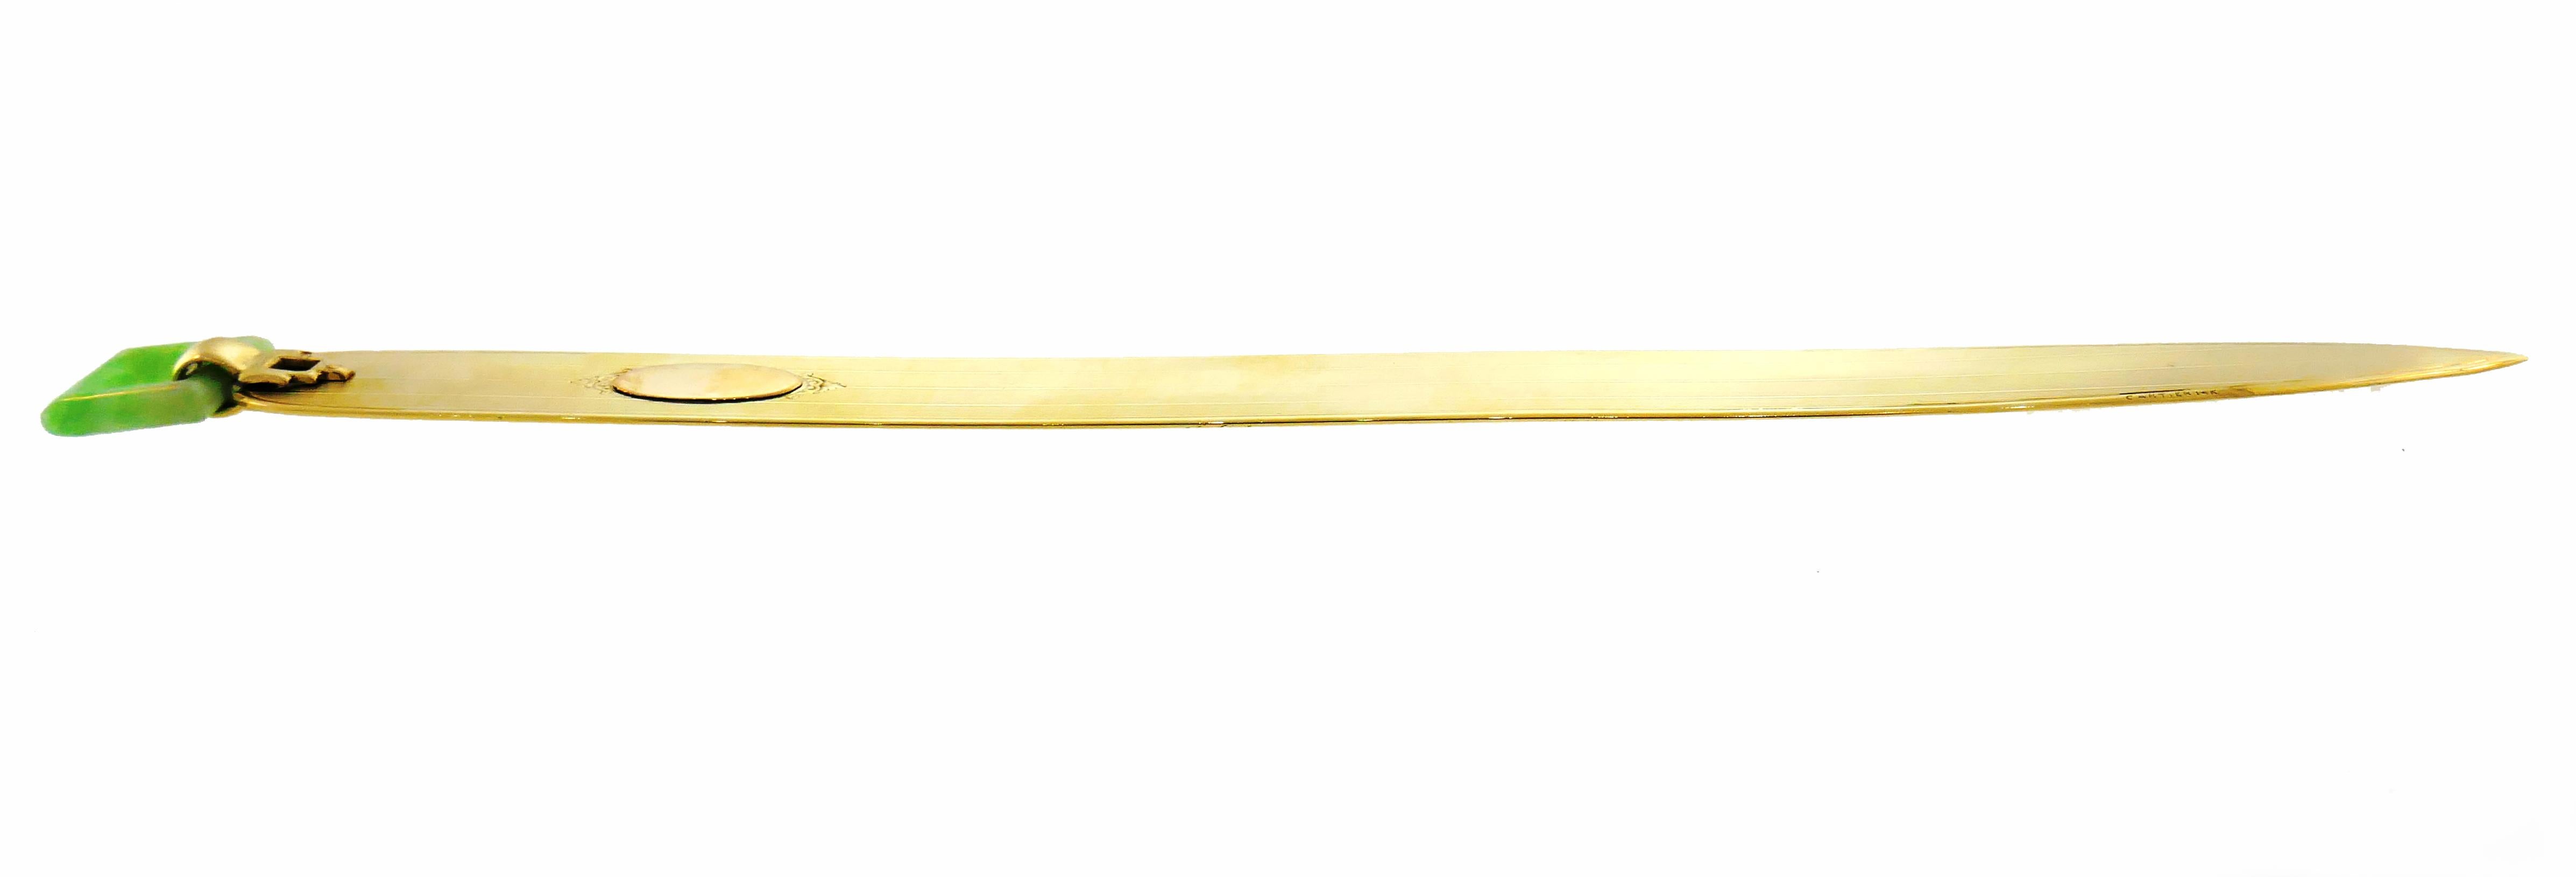 Slick and elegant letter opener created by Cartier, New York. Exquisite and chic, it makes a stylish gift and is a great addition to your accessories collection!
The letter opener is made of 14 karat yellow gold and jade. 
It is measures 7-1/4 x 1/2